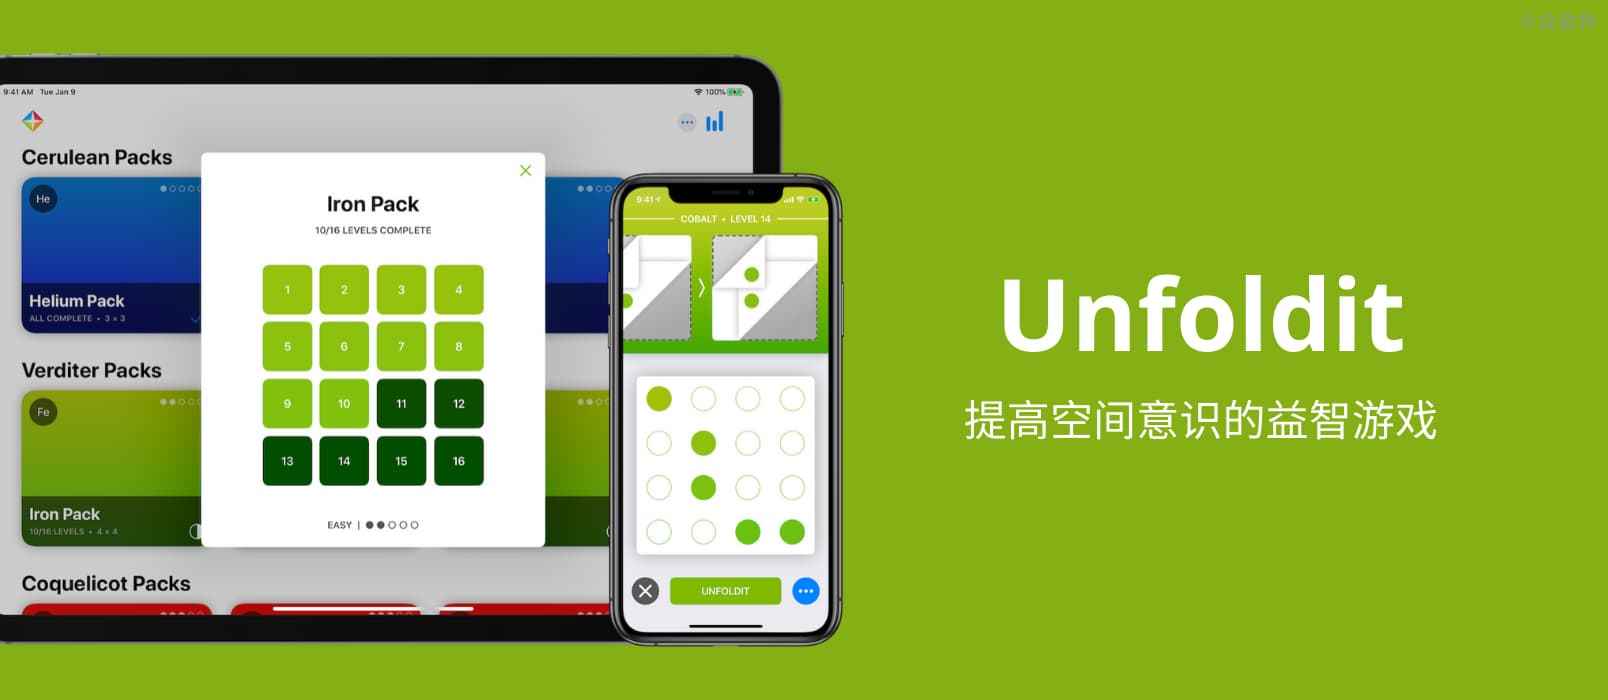 Unfoldit – 用来提高你的空间意识的益智游戏[iPhone/Android]